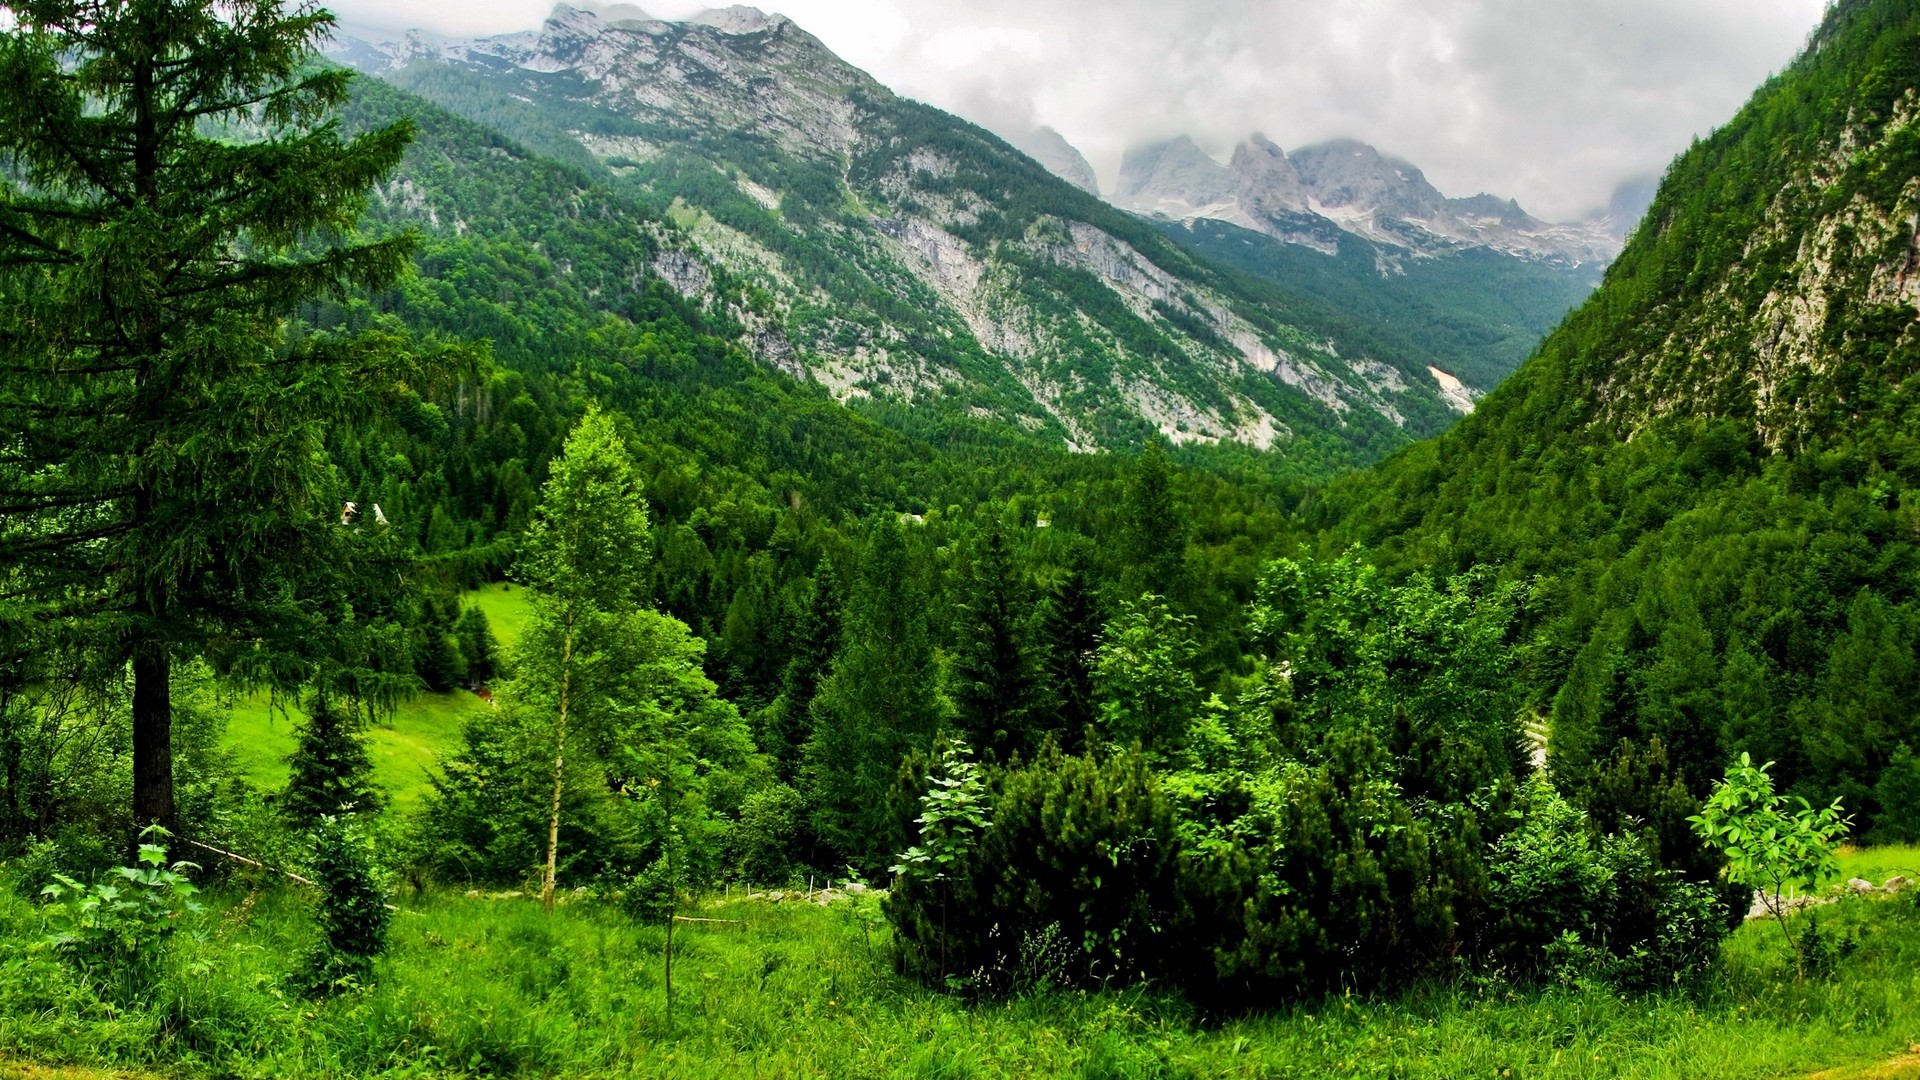 1920x1080 wallpapers: Slovenia, mountains, forest, trees, perfecto (image)